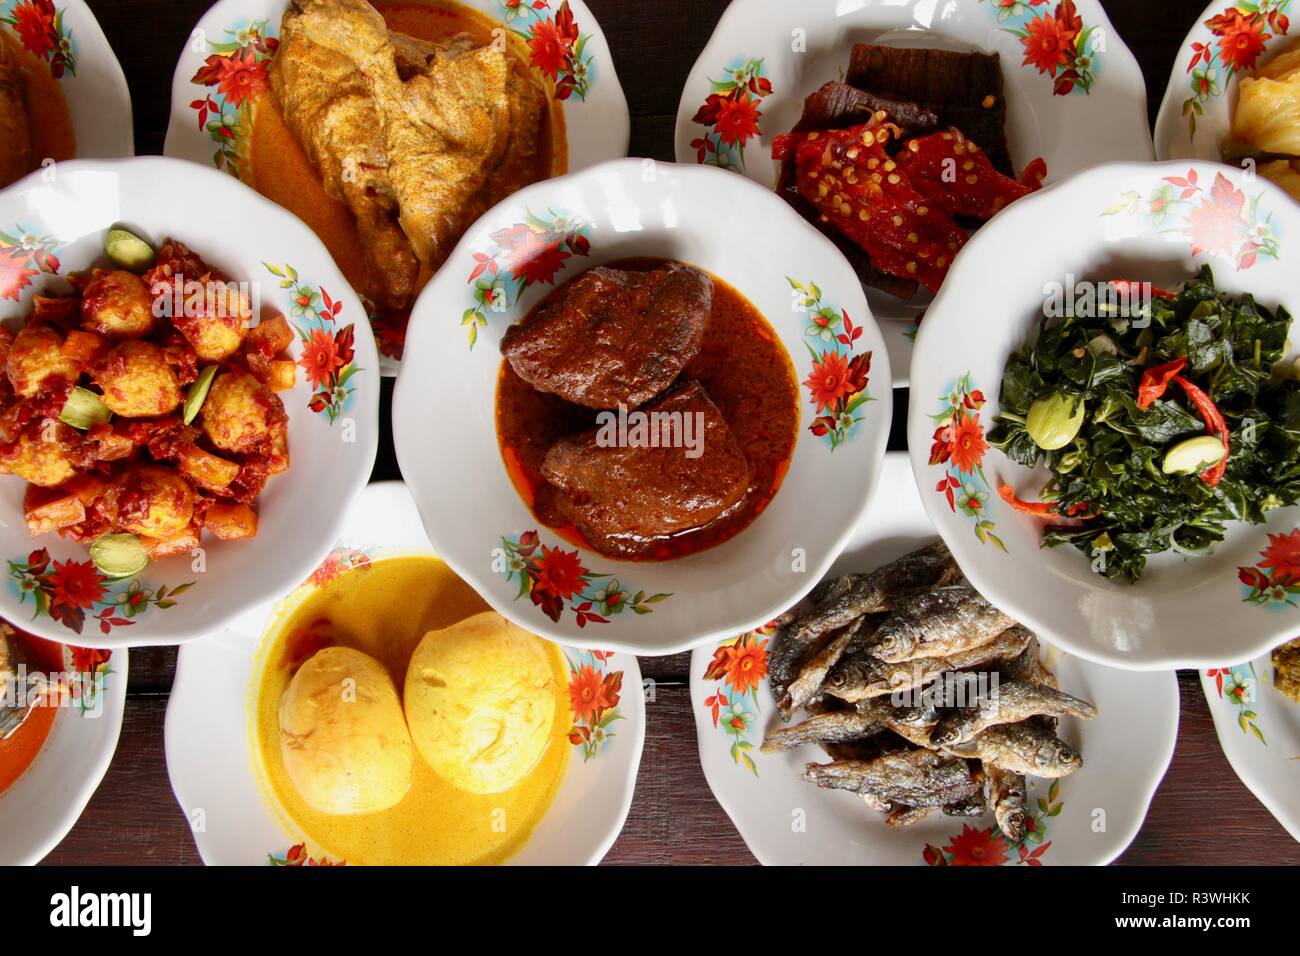 Assortment of Padang/Minang dishes served in traditional 'hidang' style. Stock Photo